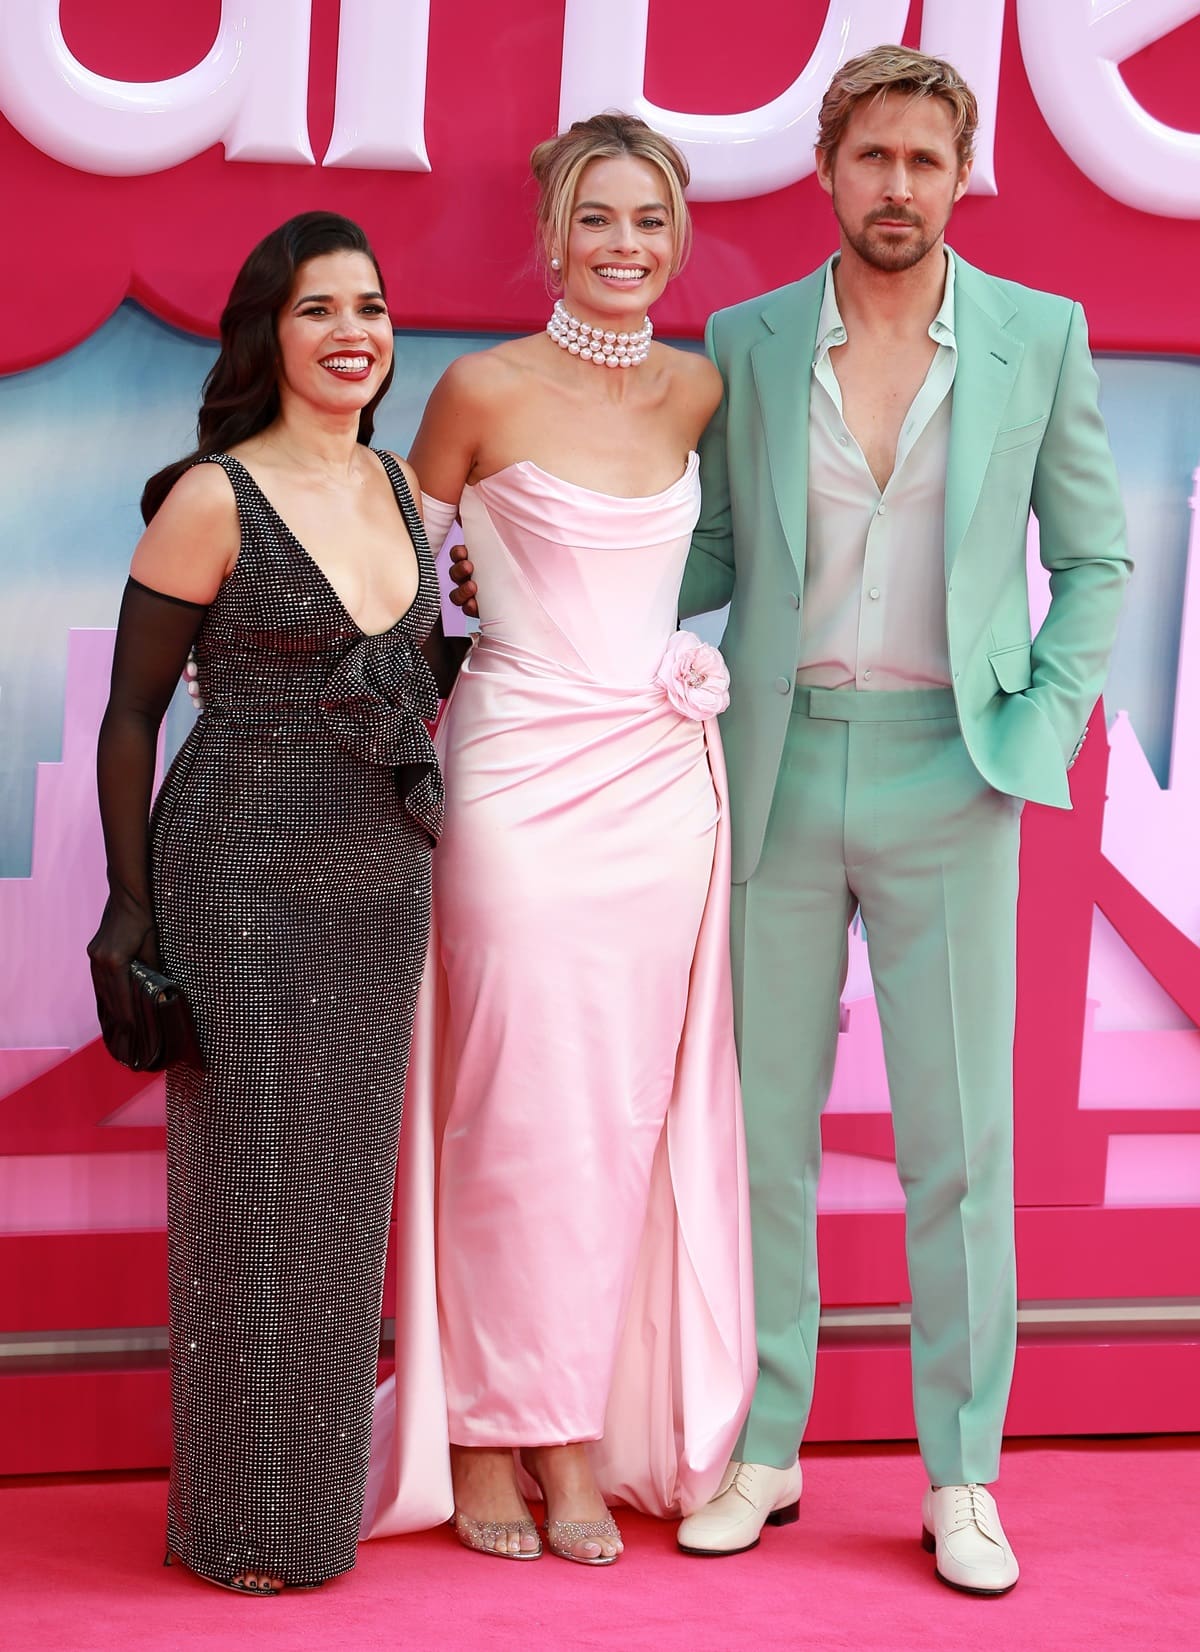 In terms of height, Ryan Gosling stands the tallest at 6 feet ¼ inch (183.5 cm), followed by Margot Robbie at 5 feet 5 ½ inches (166.4 cm), while America Ferrera is the shortest at 5 feet 0 inches (152.4 cm)